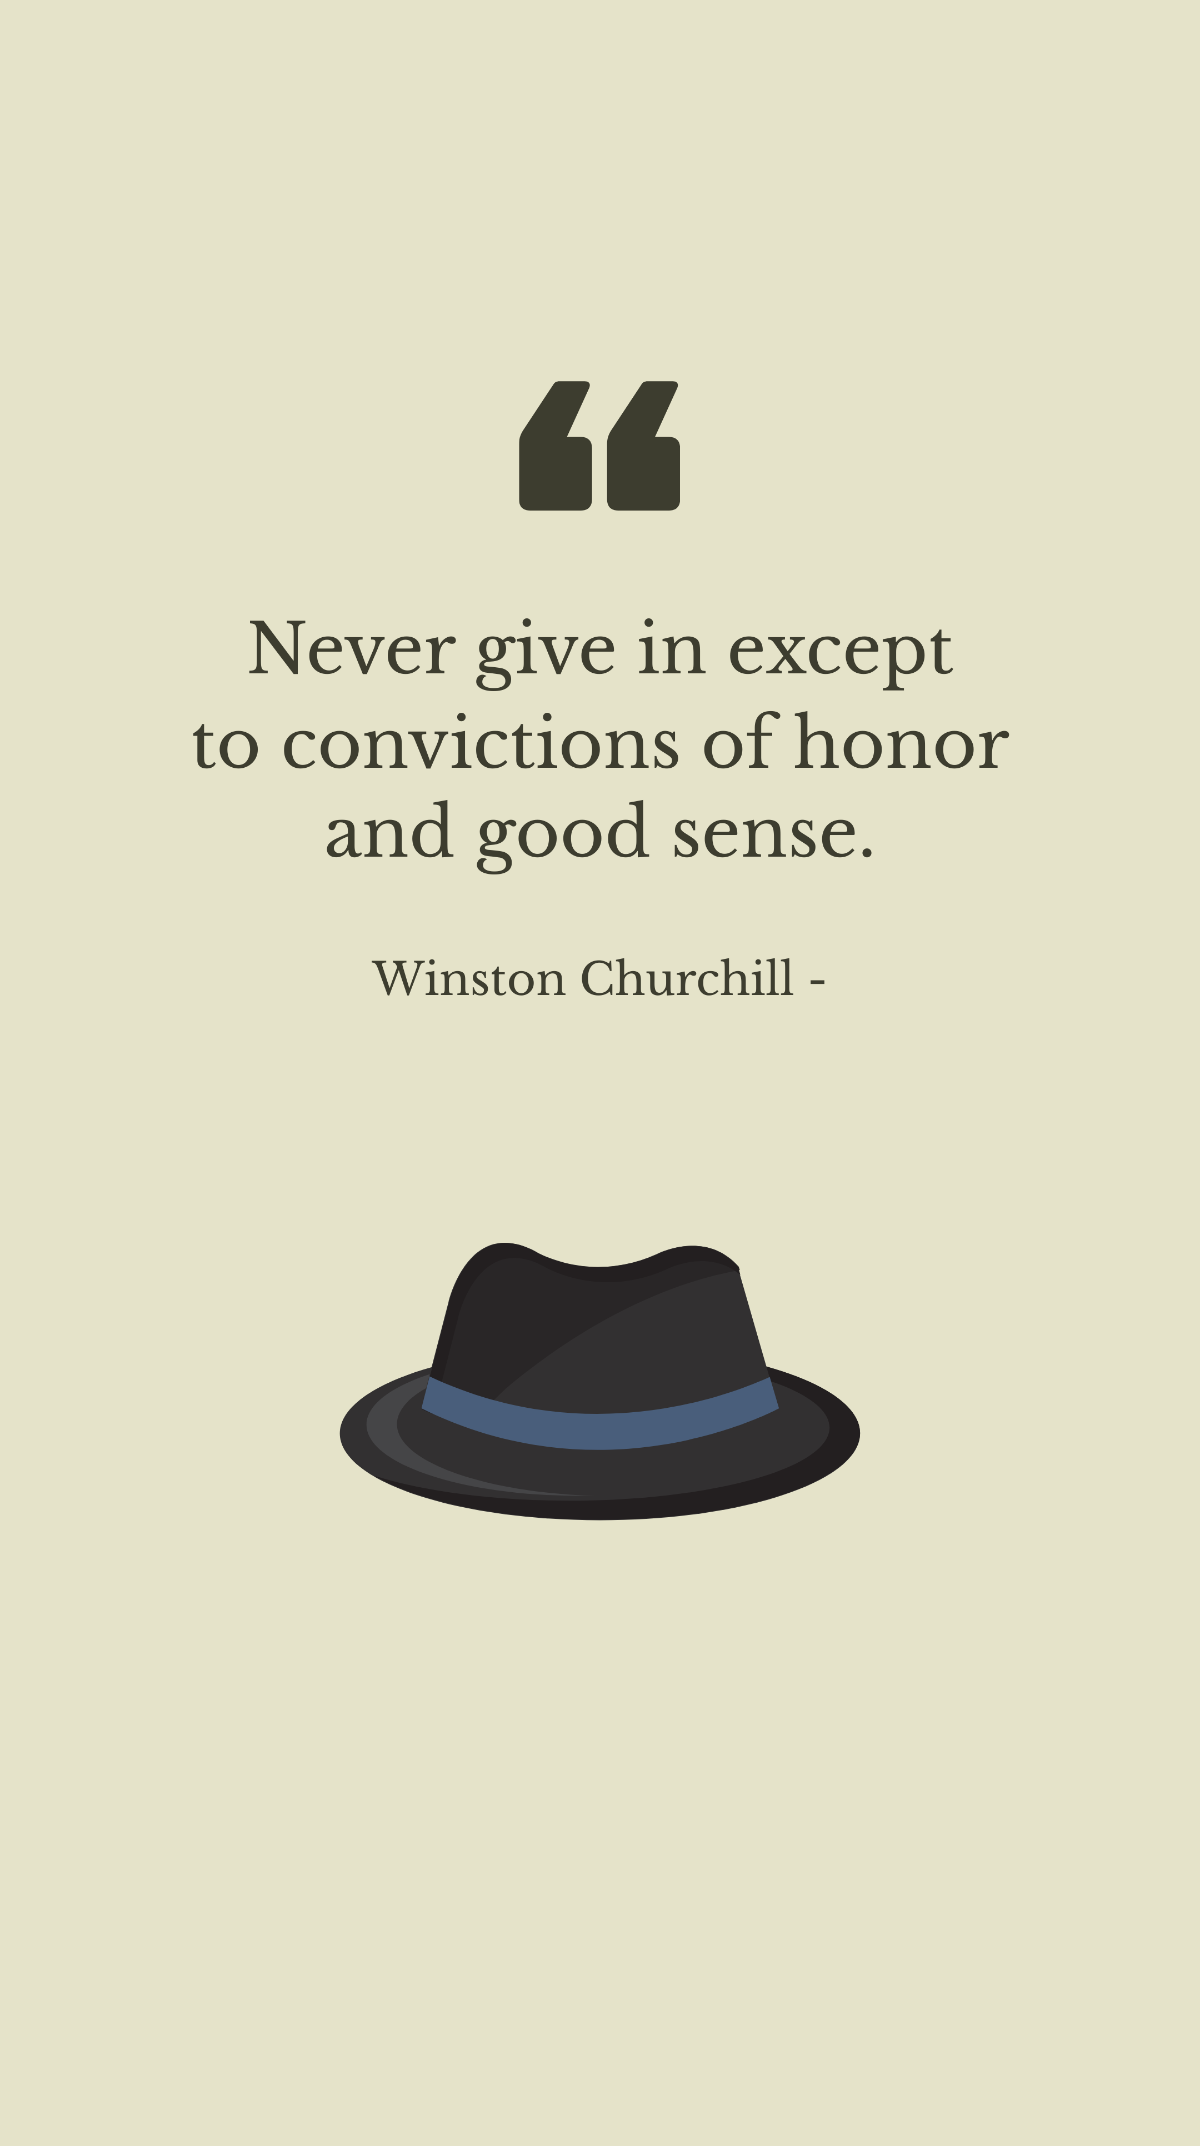 Winston Churchill - Never give in except to convictions of honor and good sense. Template